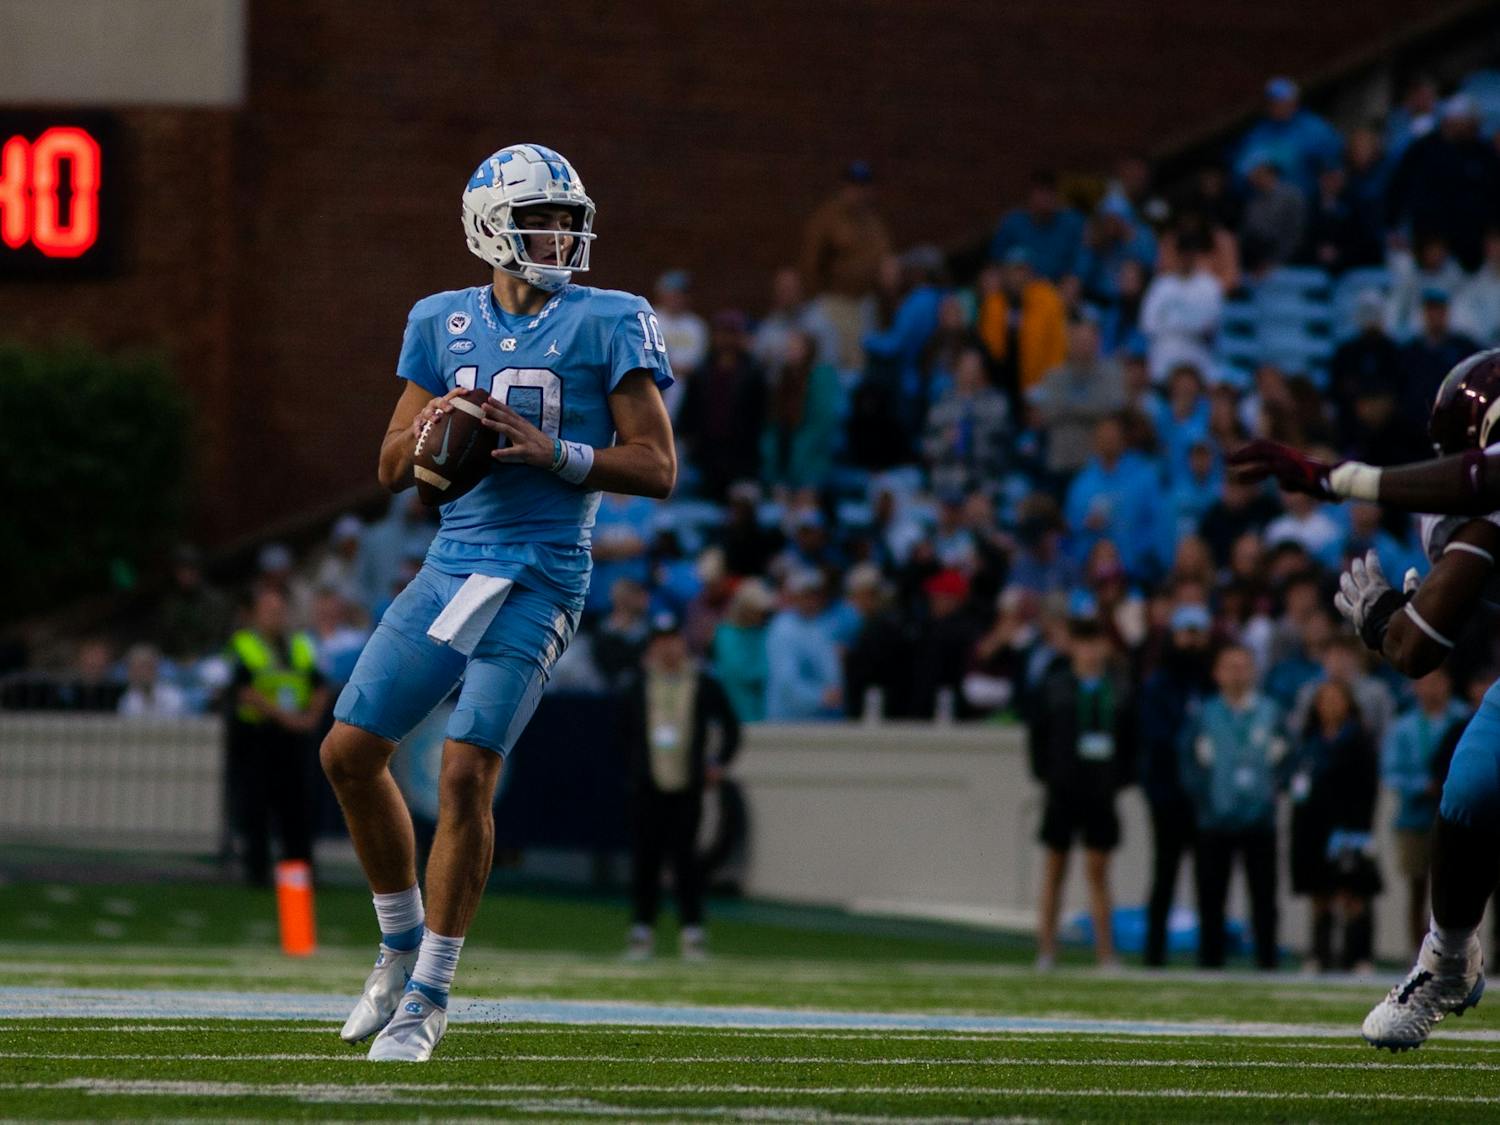 UNC first-year quarterback Drake Maye (10) looks for a receiver during a home football game at Kenan Stadium against Virginia Tech on Saturday, Oct. 1, 2022. UNC won 41-10.